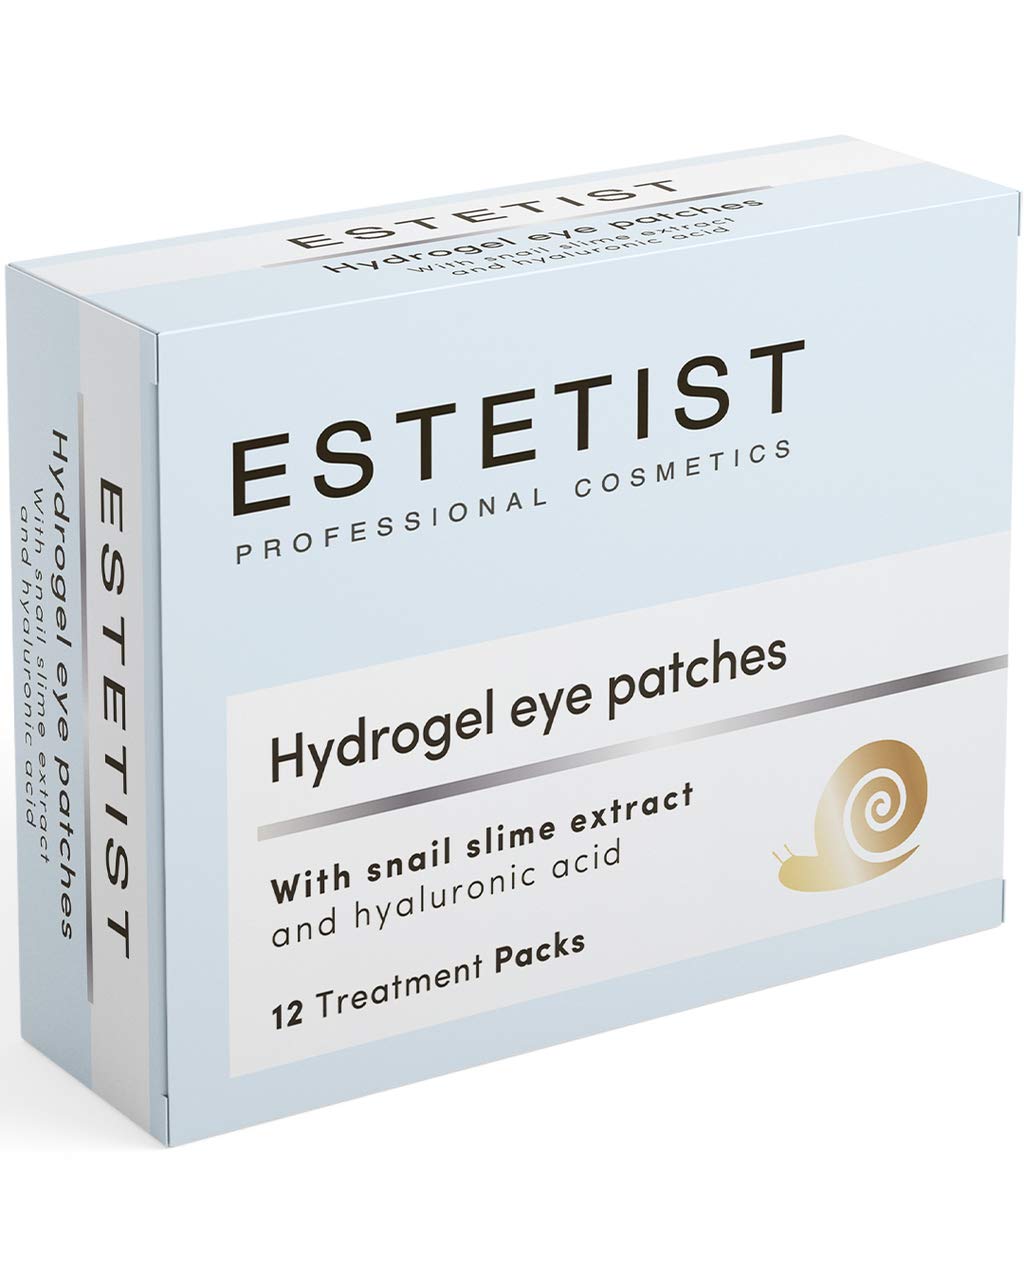 Book Cover Estetist Under Eye Patches Eye Mask for Puffy Eyes, Dark Circles and Under Eye Bags Treatment With Hyaluronic Acid and Snail Slime Extract